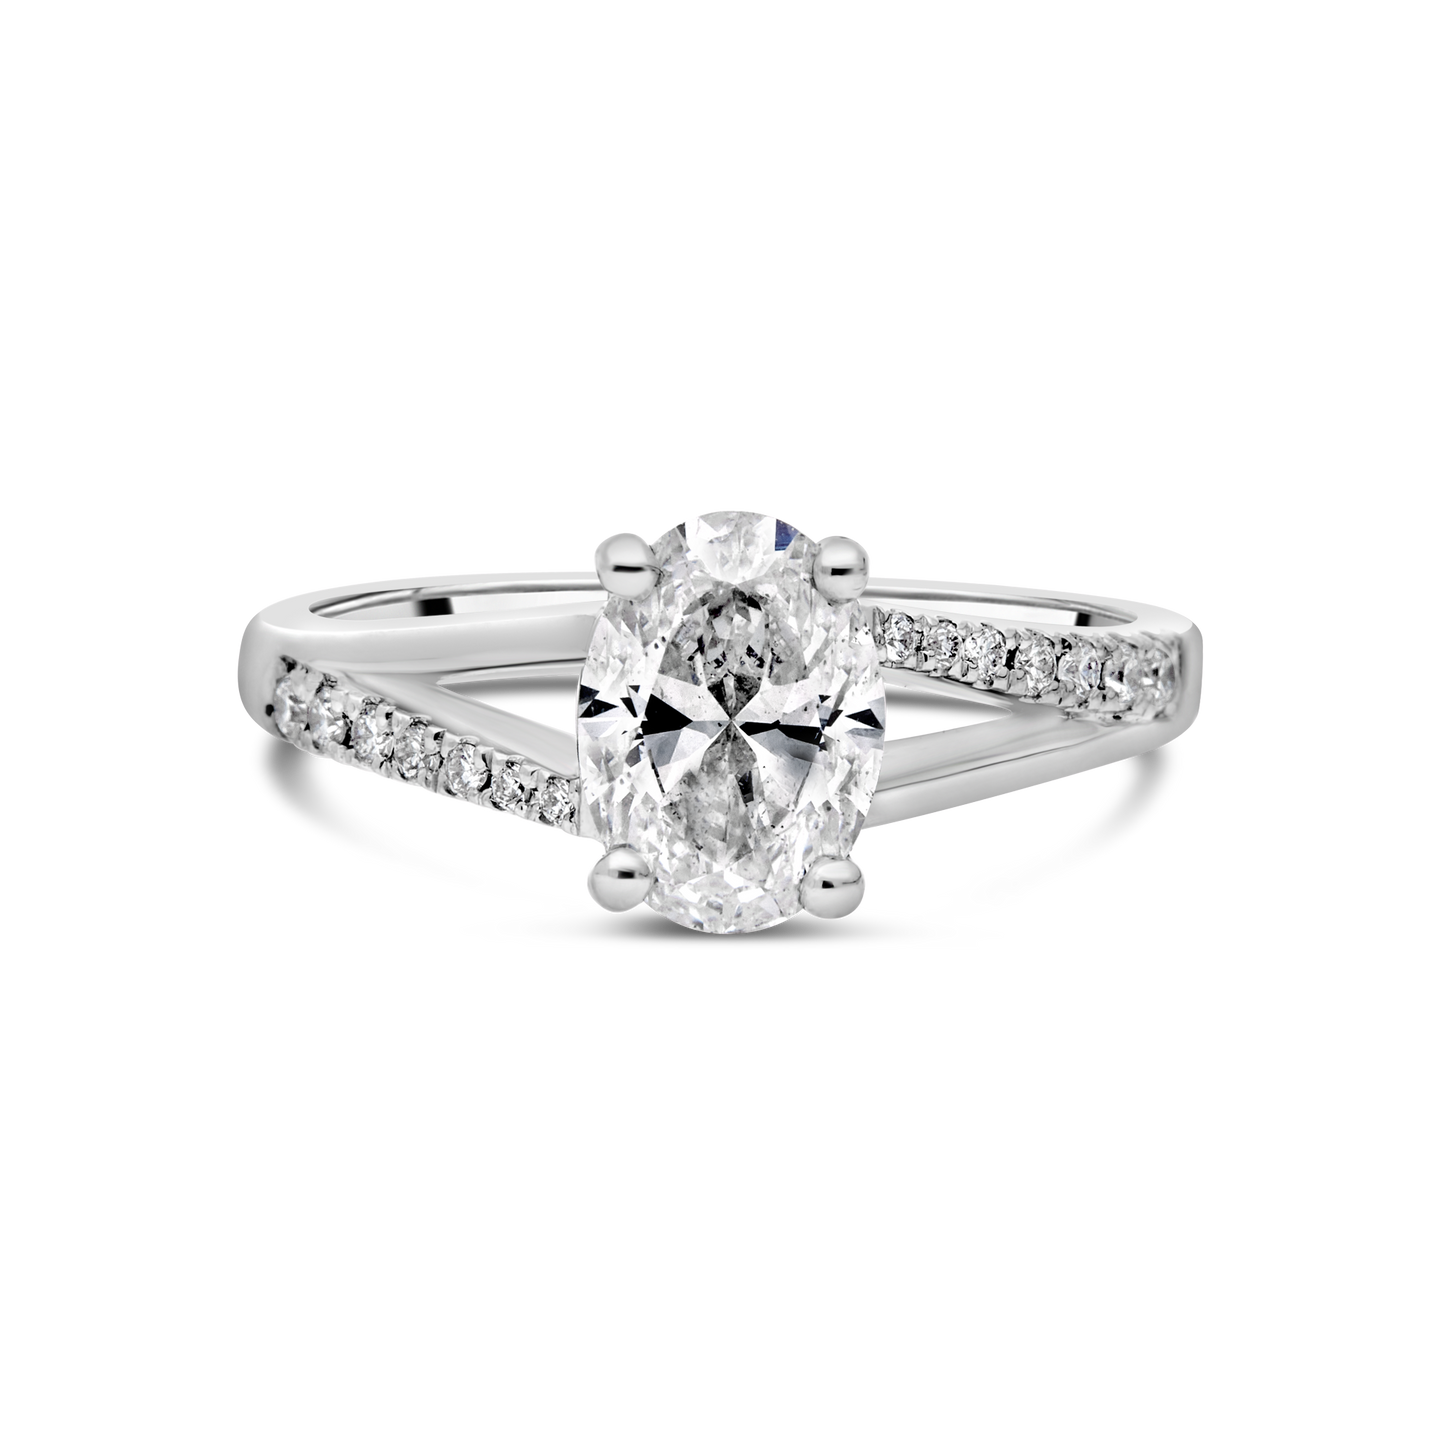 The "Niamh" Platinum Oval Diamond with Sides